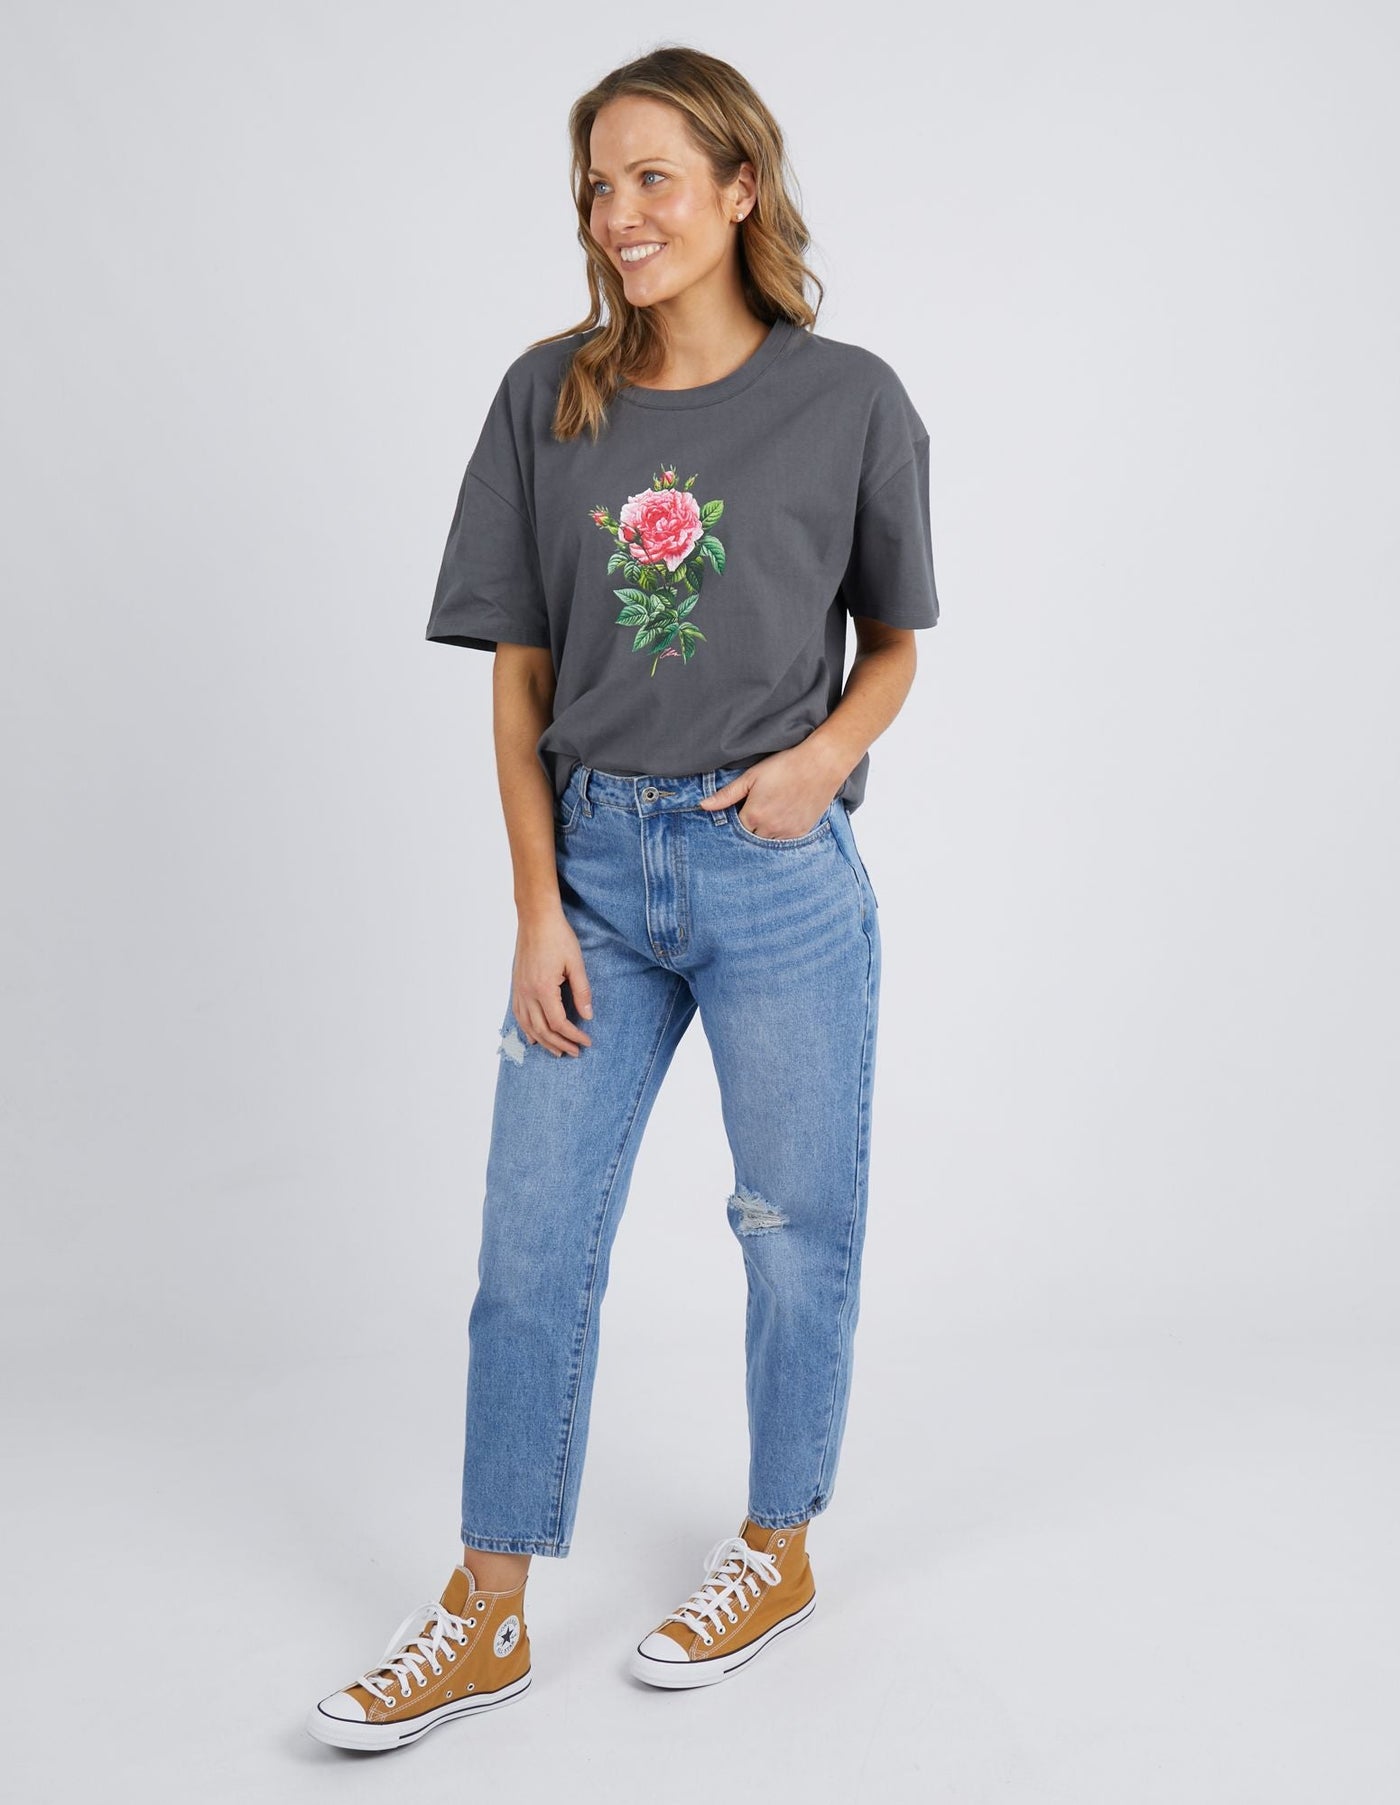 Rose Bloom Tee - Charcoal-Elm Lifestyle-Lima & Co